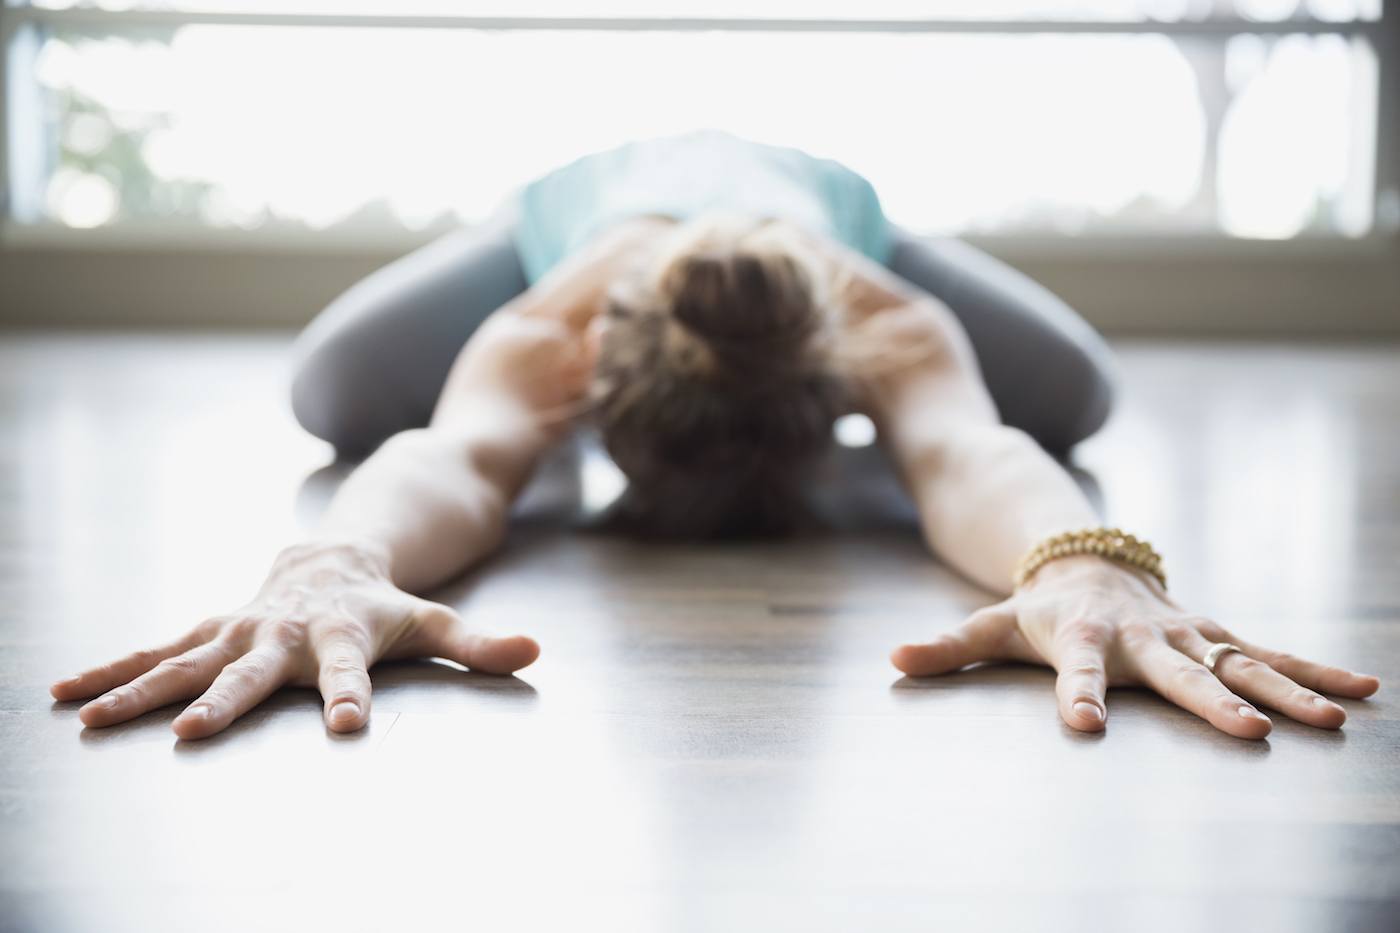 Crying during yoga: How to move through it in a healthy way